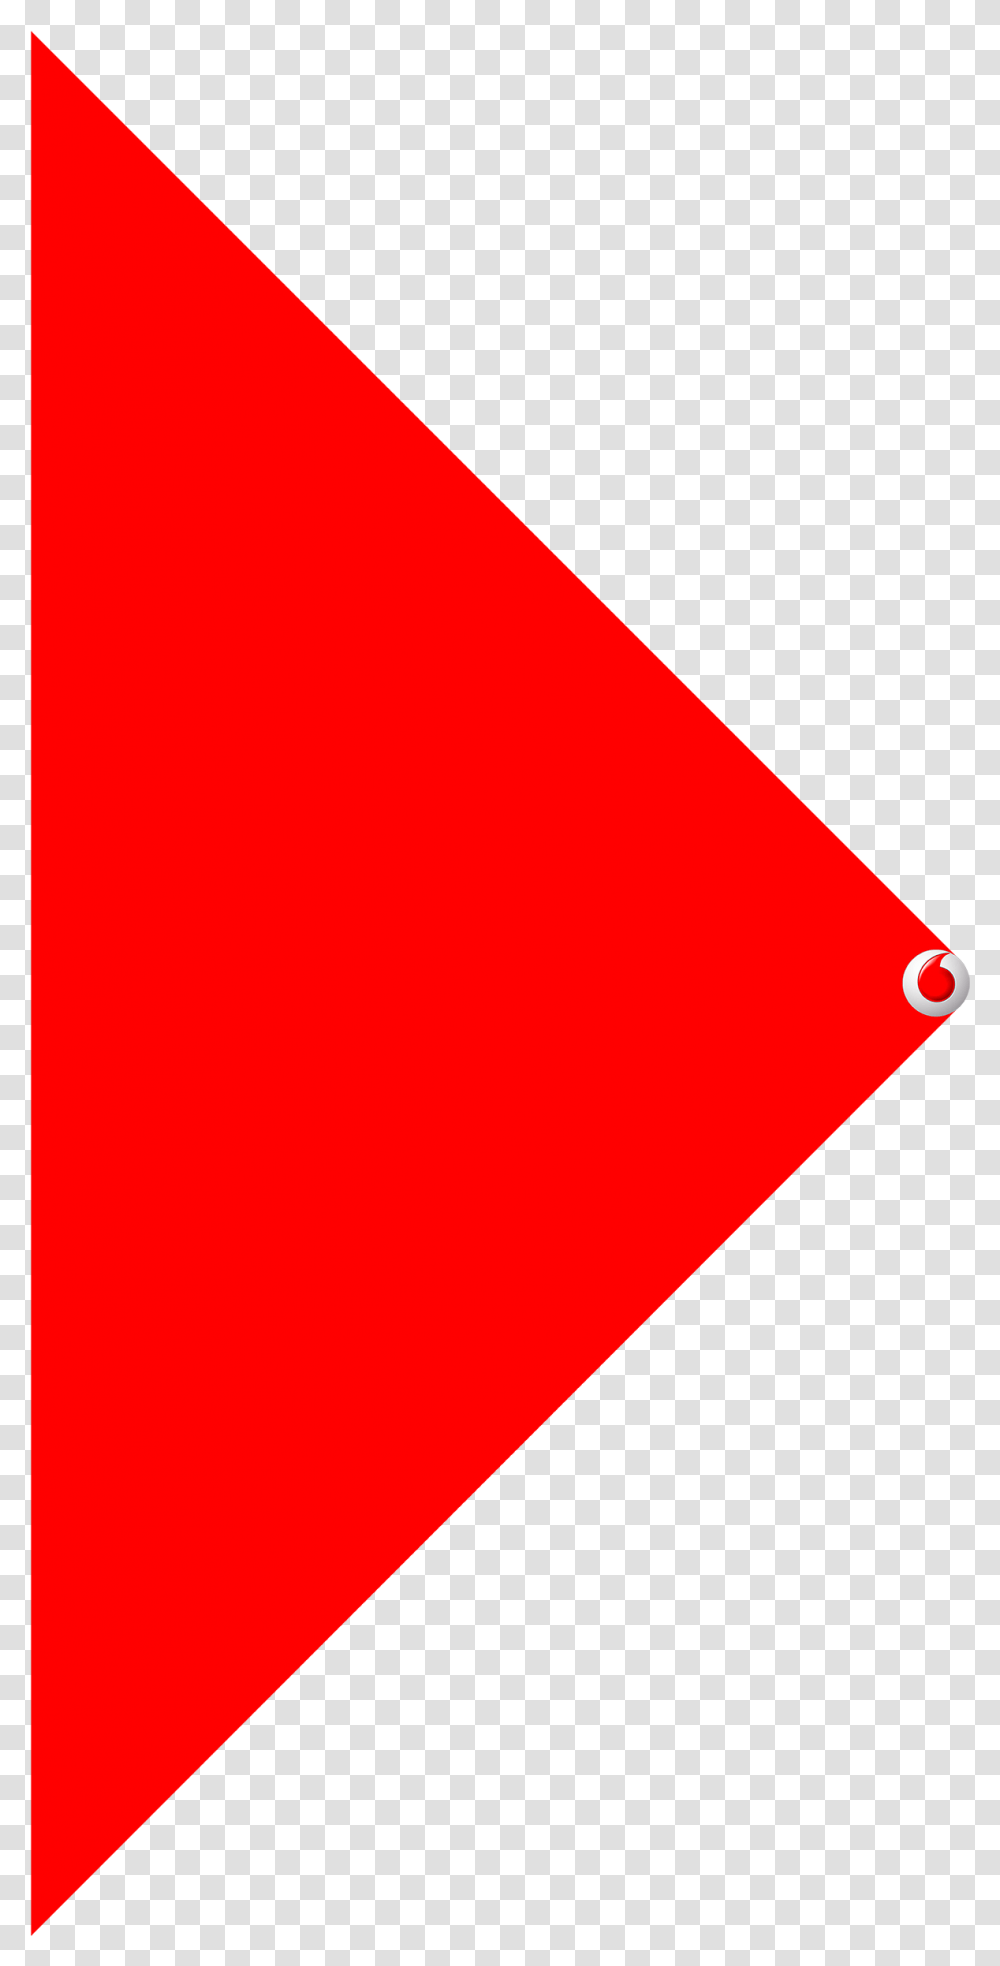 Kimberly Boyle Image Rhombus Red Arrow Head, Light, Symbol, Triangle, Sign Transparent Png